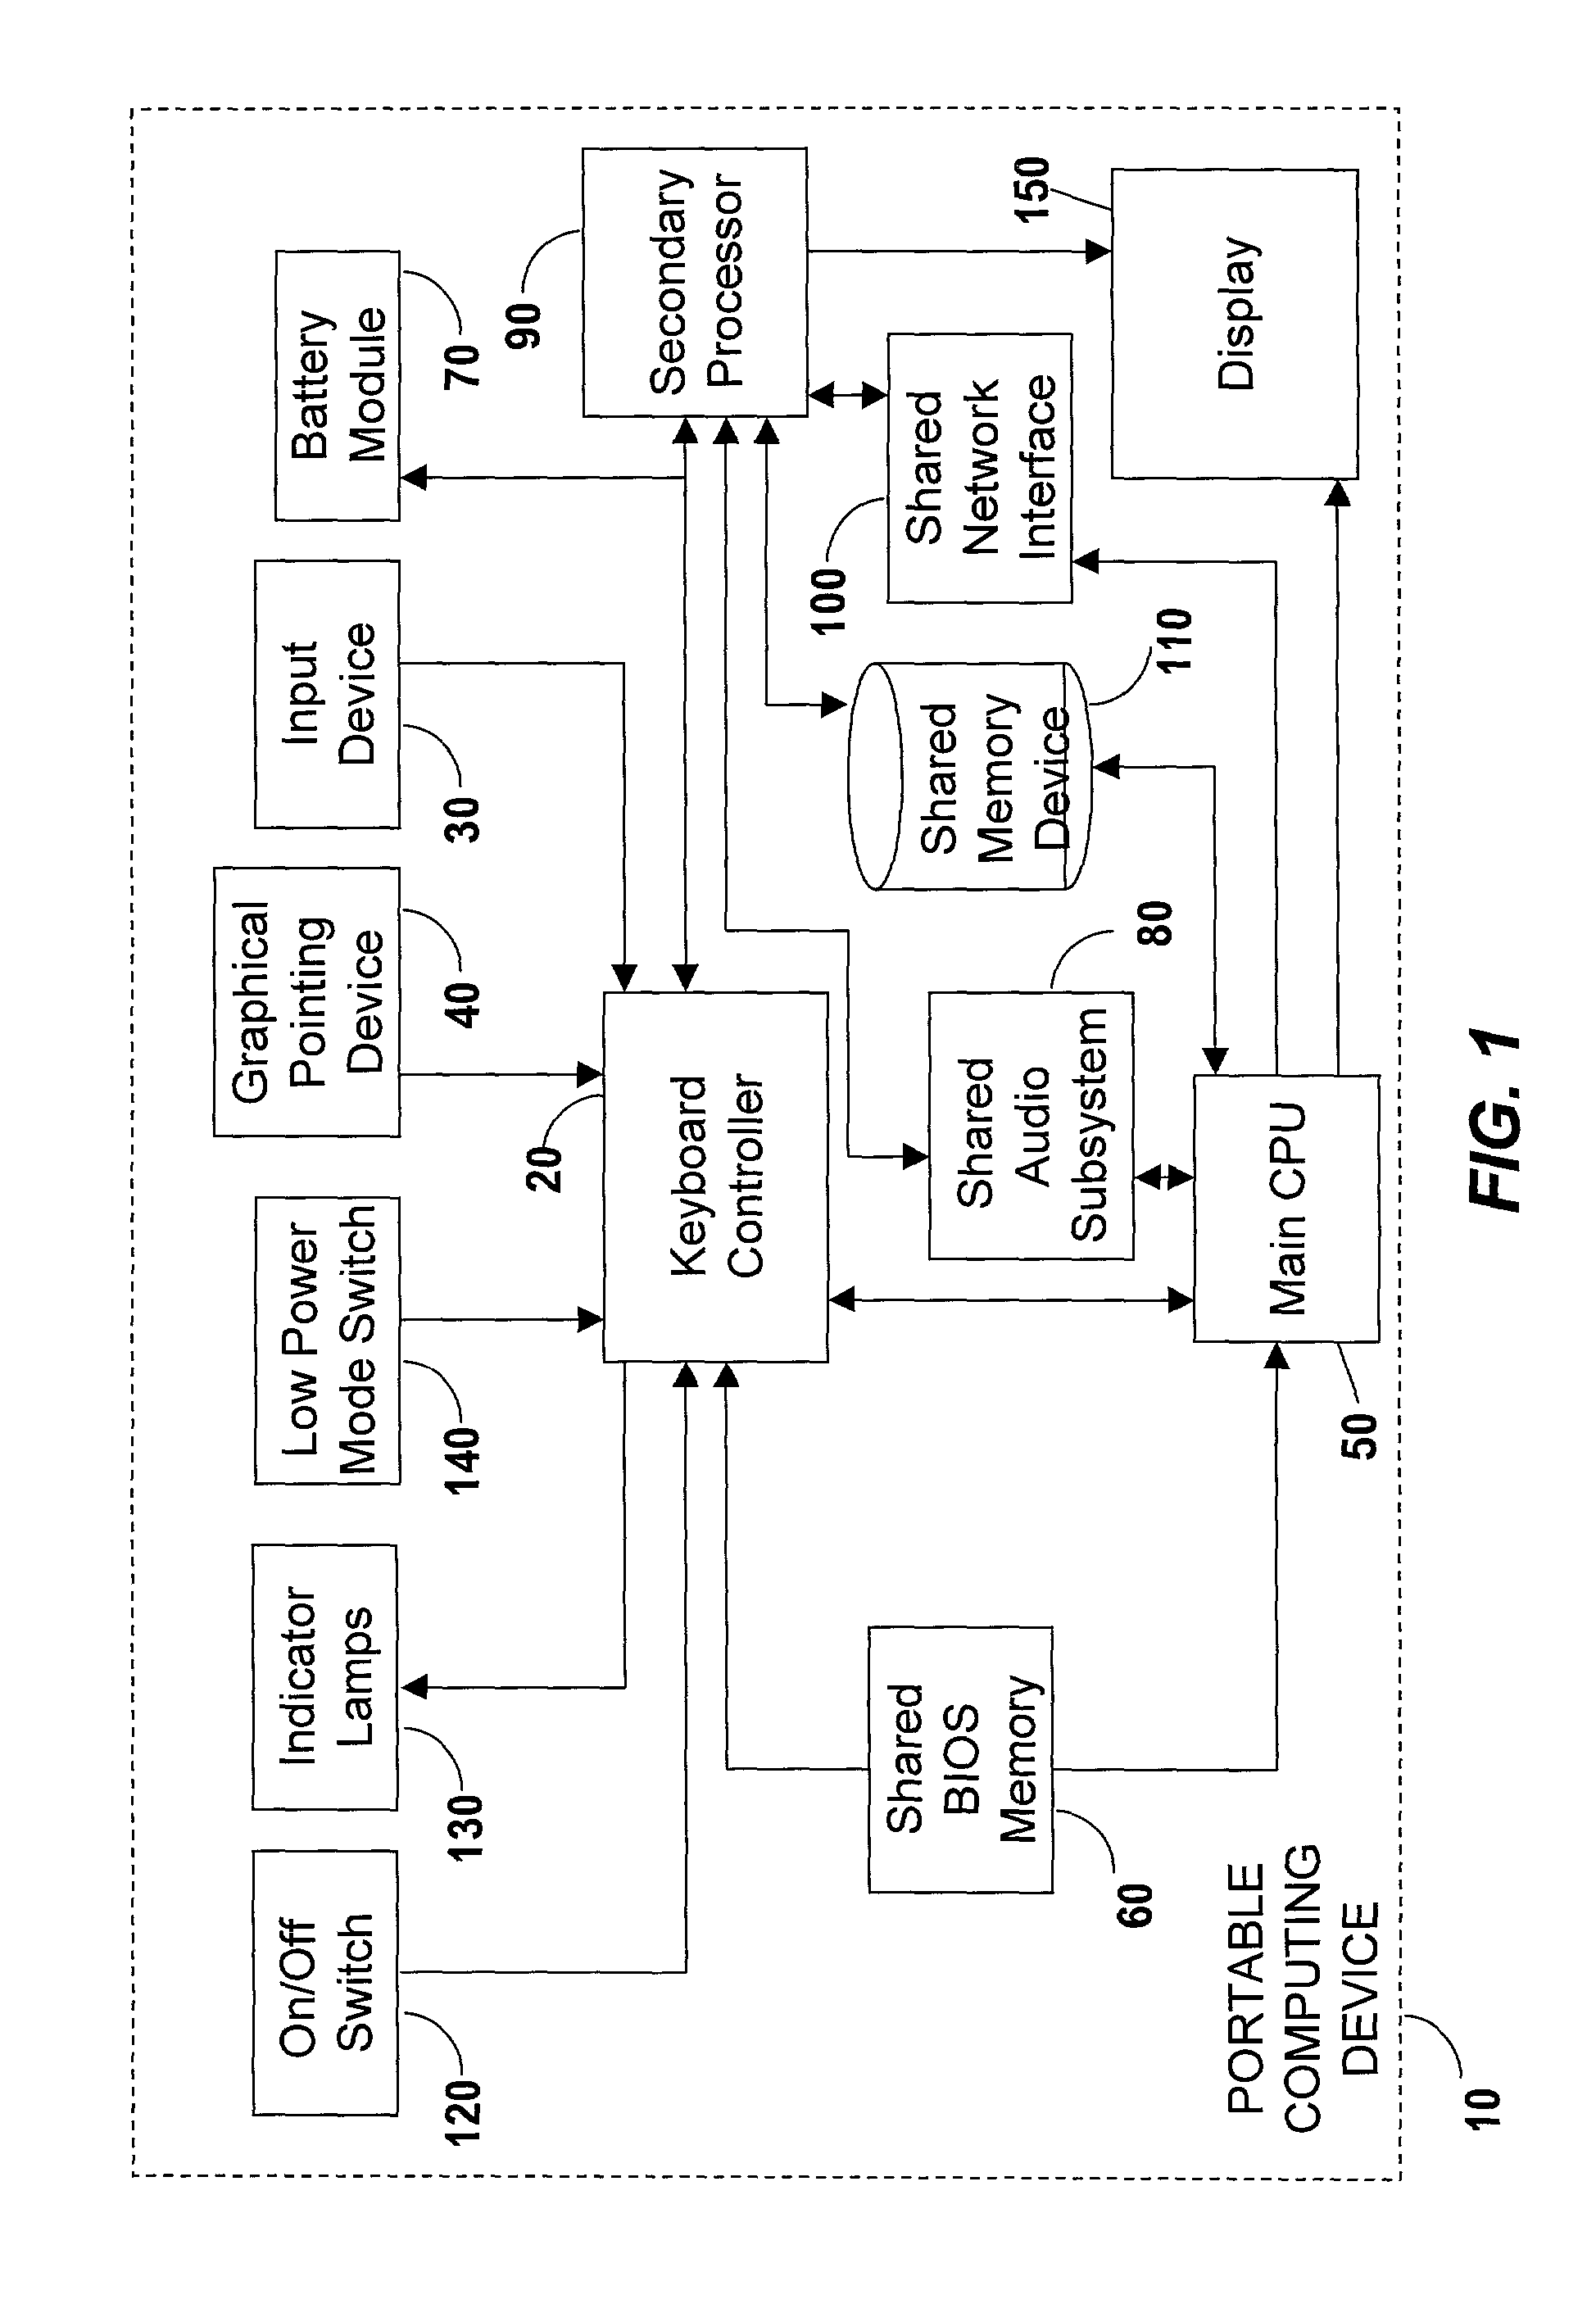 Computing device having a low power secondary processor coupled to a keyboard controller